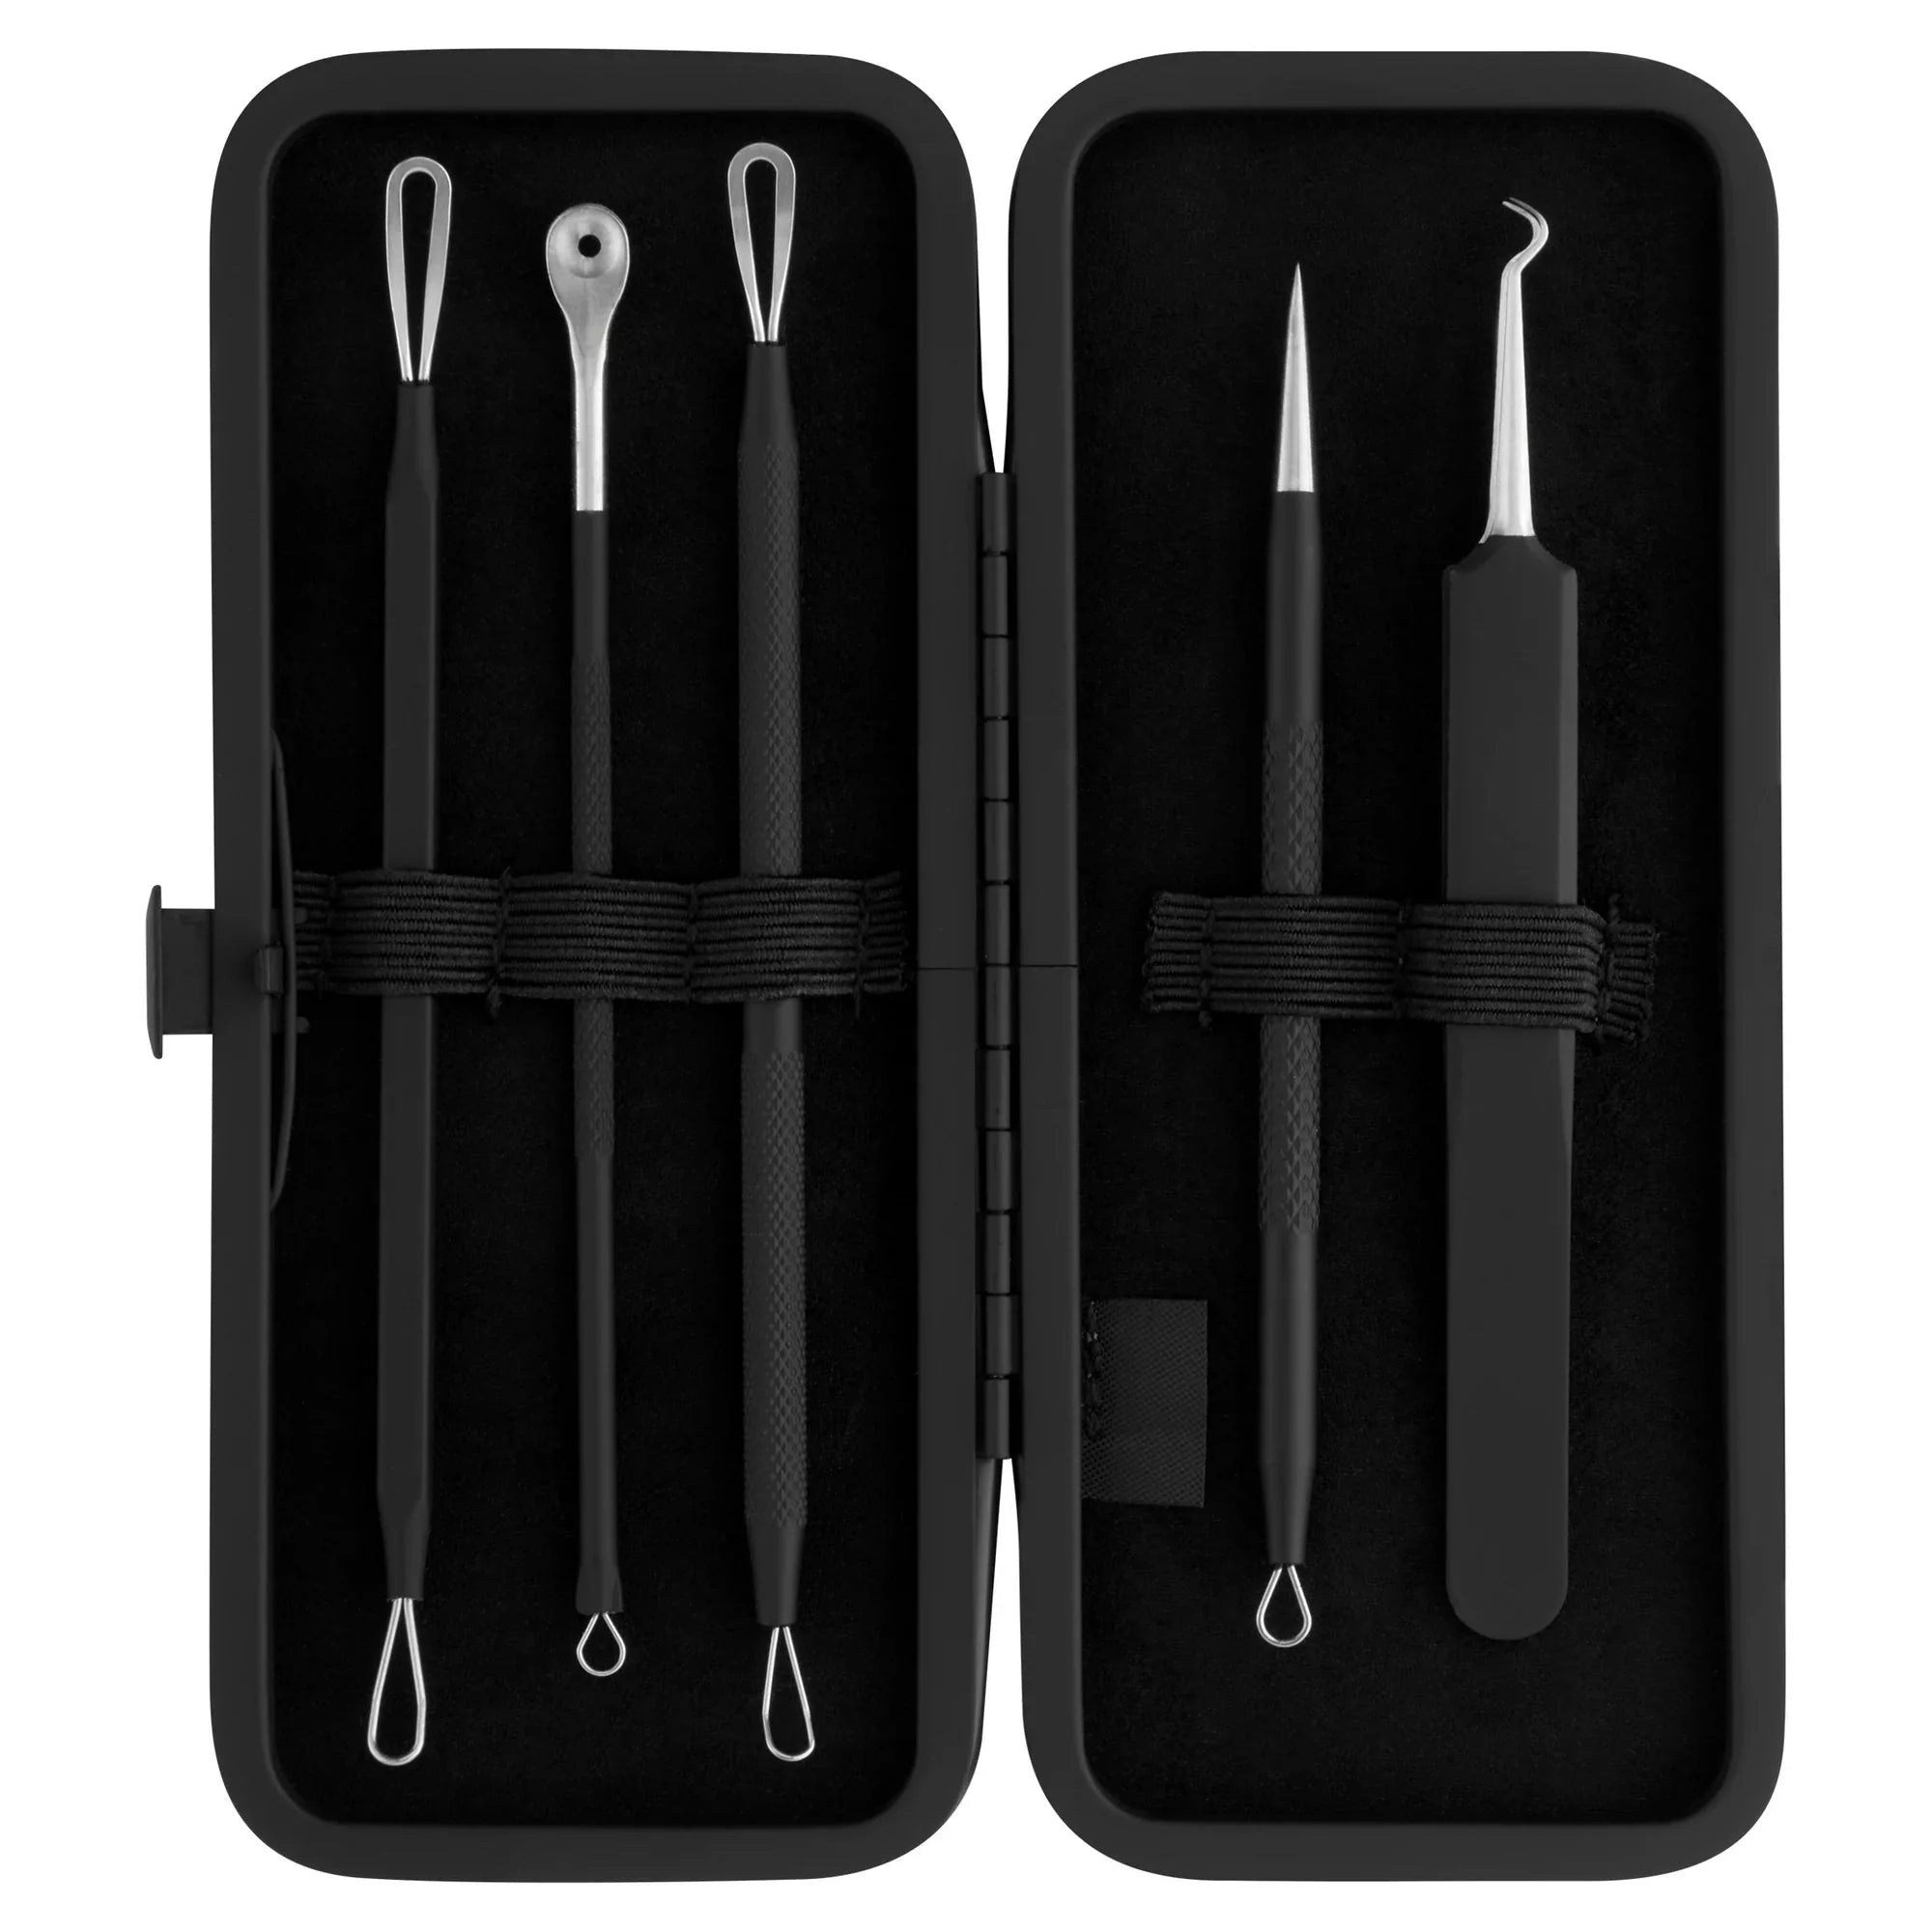 Wholesale prices with free shipping all over United States Equate Beauty Acne Removal Blemish Tool Set, 5 Count - Steven Deals